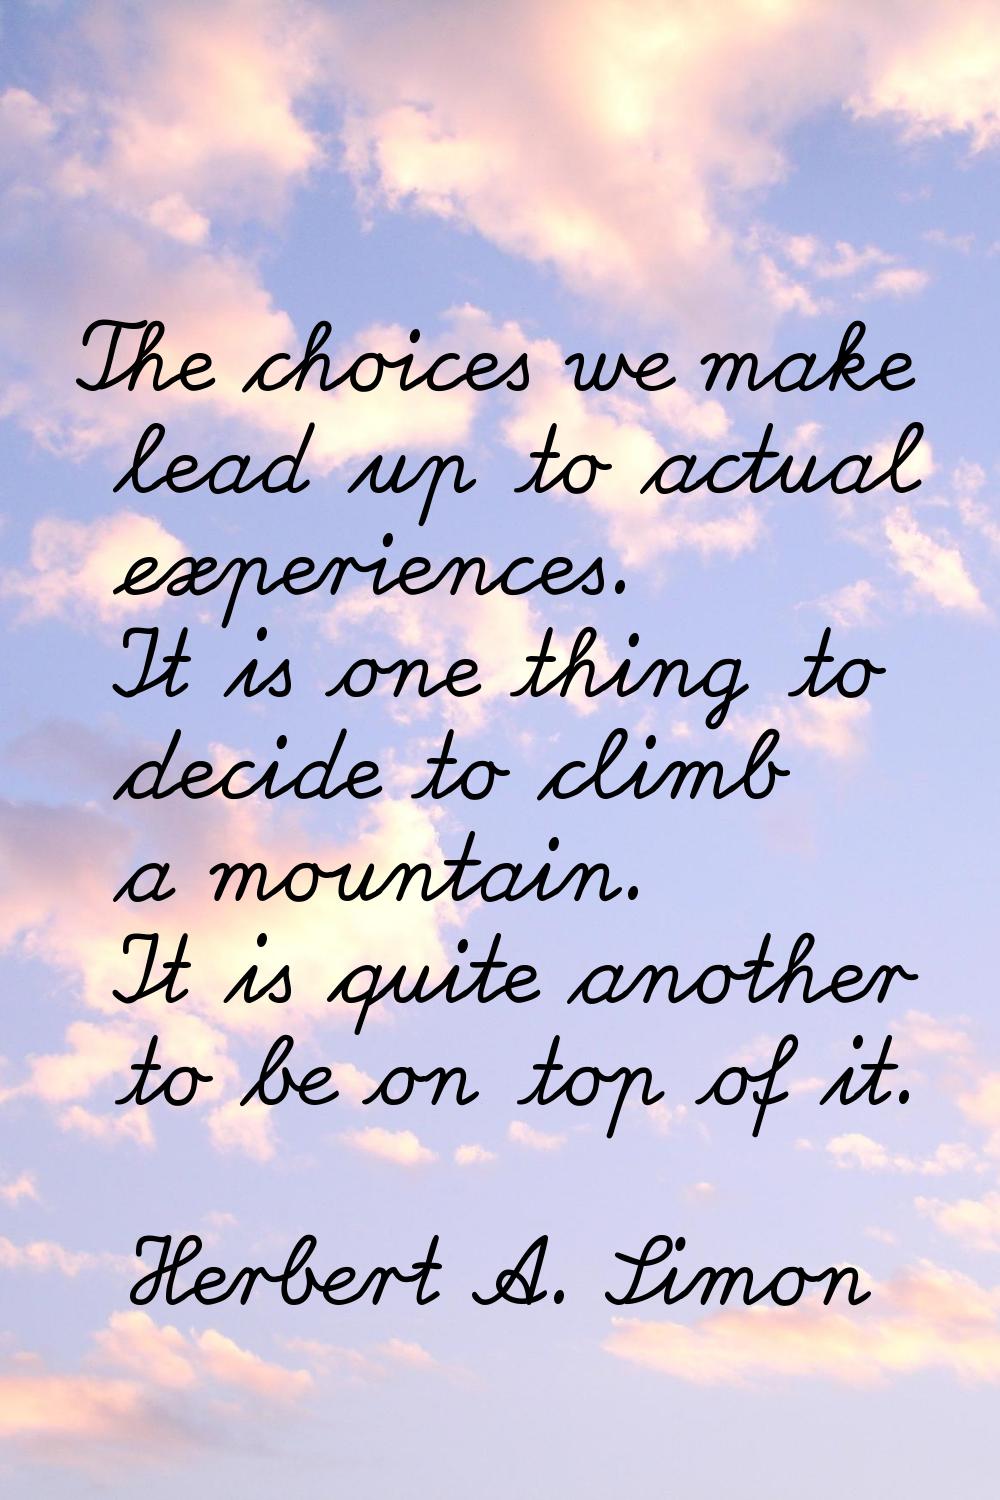 The choices we make lead up to actual experiences. It is one thing to decide to climb a mountain. I